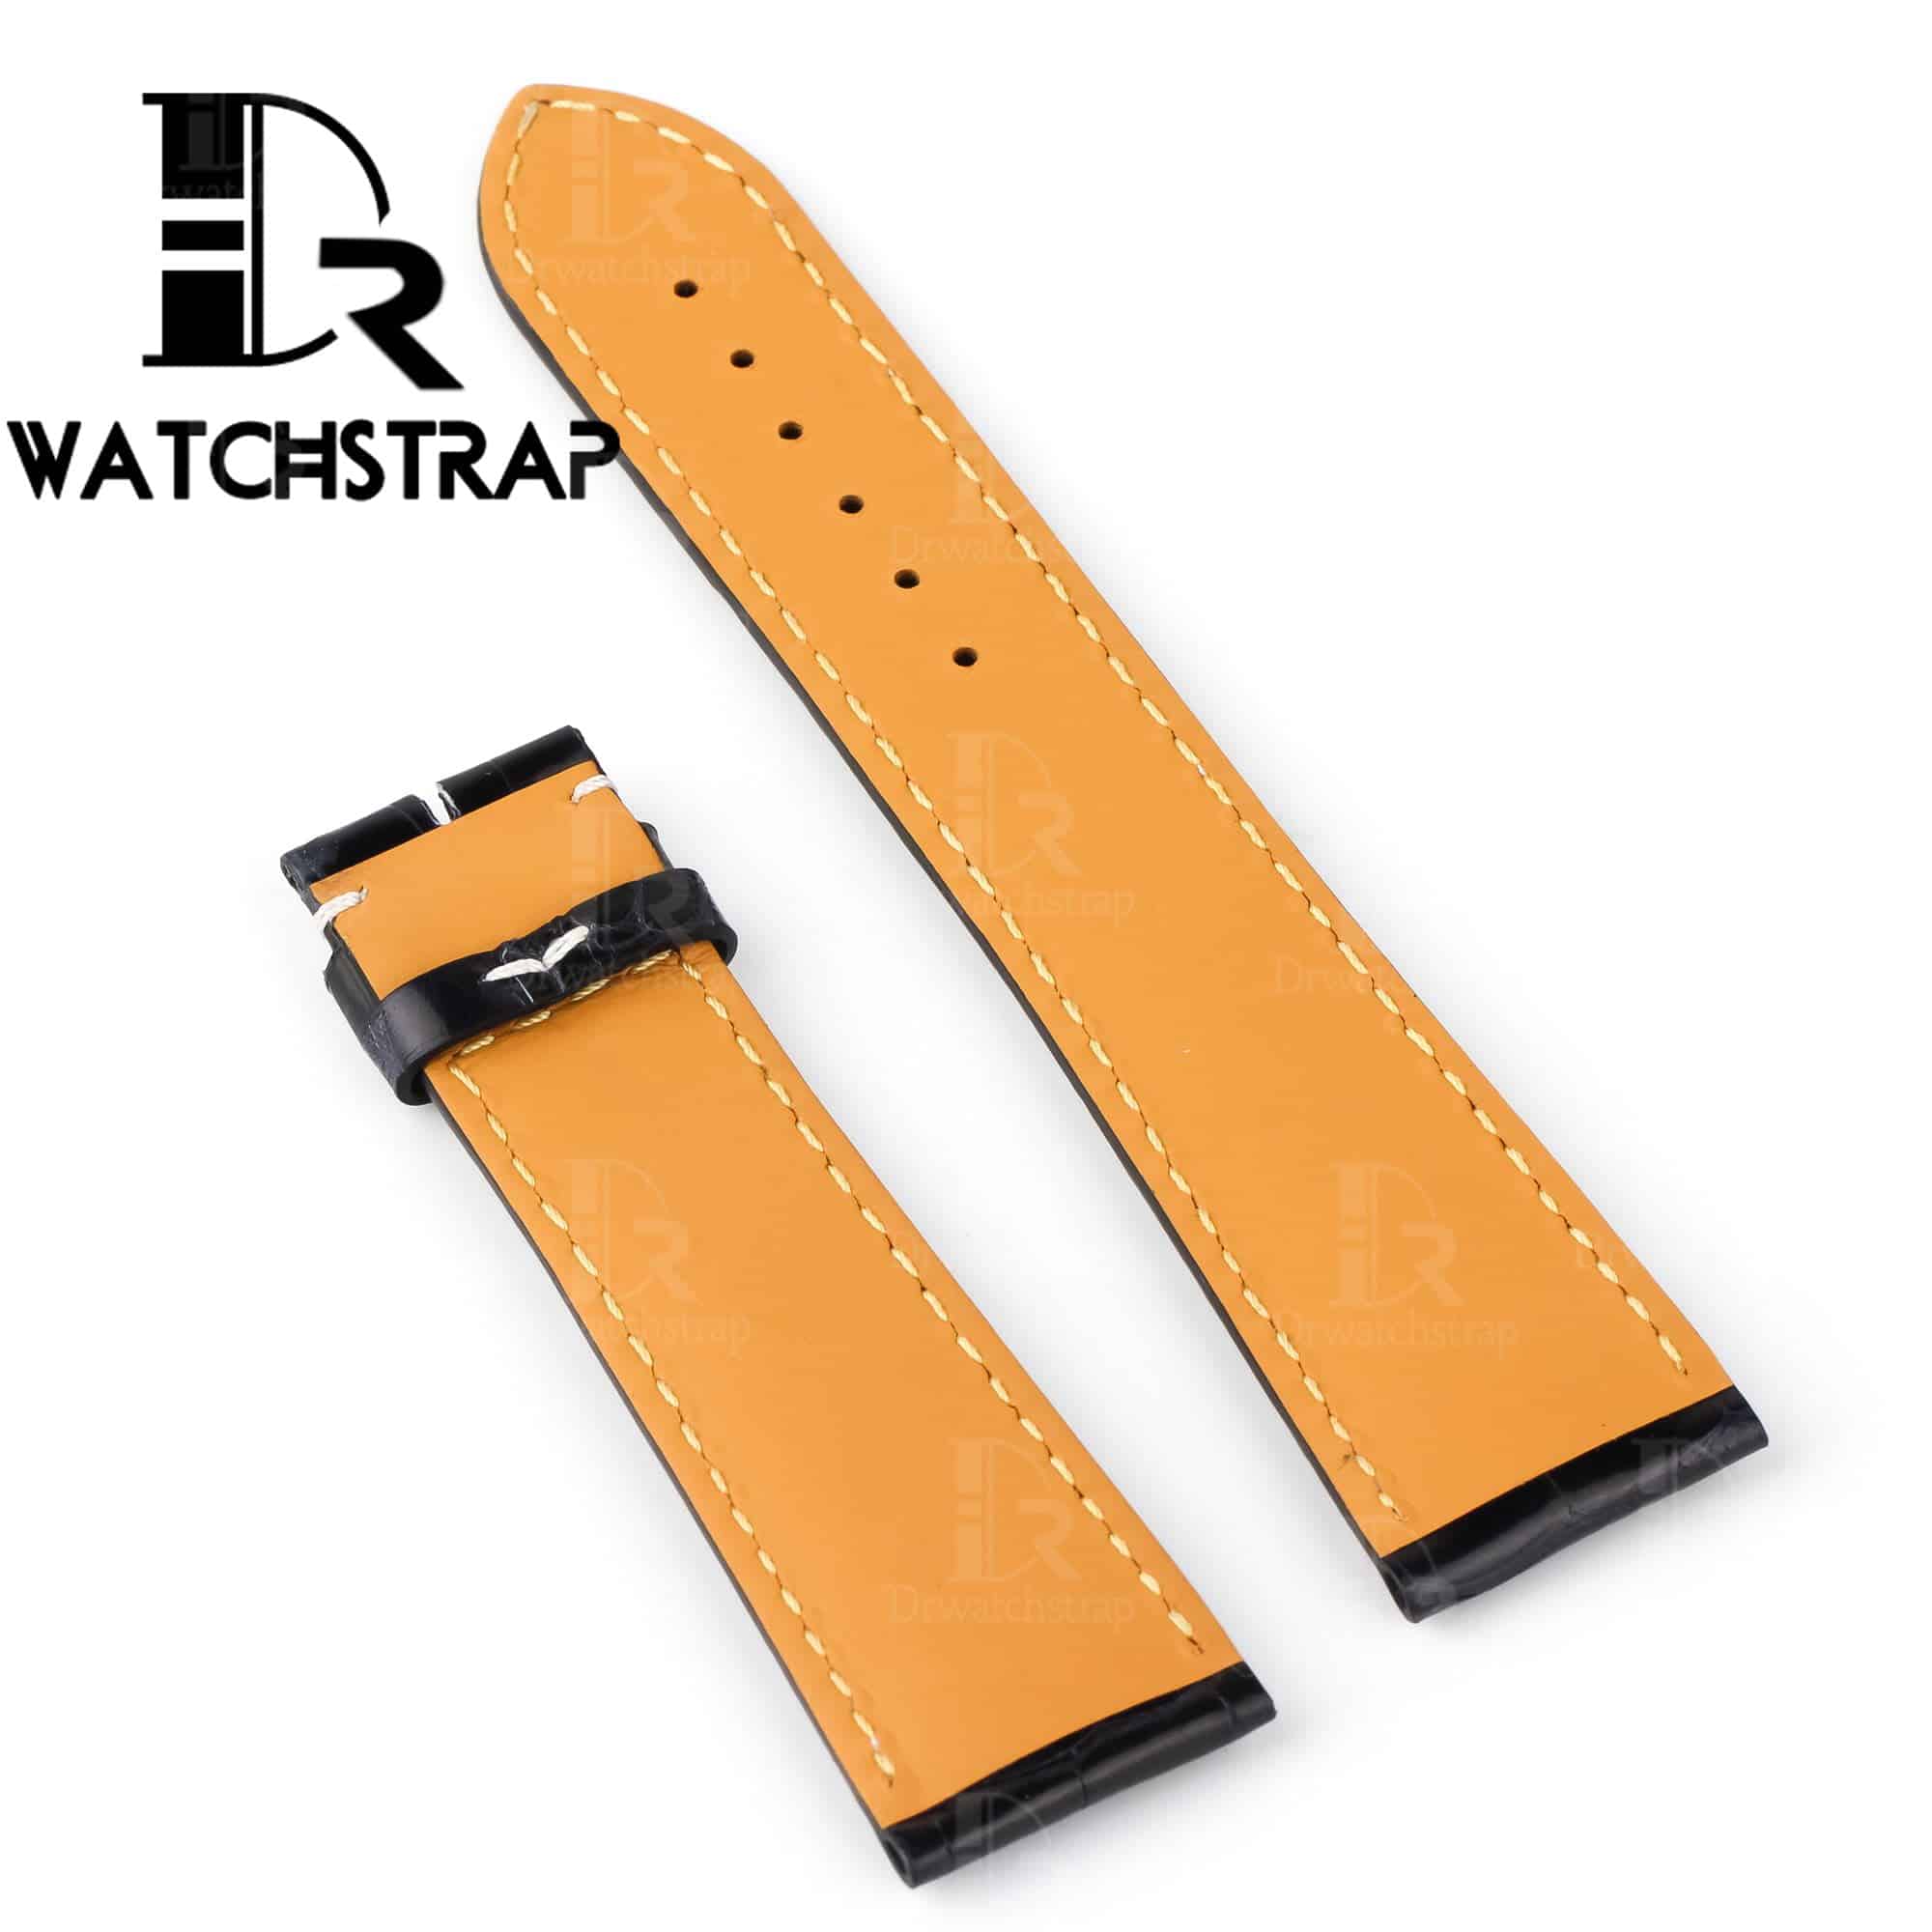 Buy Replacement America alligator leather watch band strap for Breitling Bentley Navitimer Superocean wristwatch strap